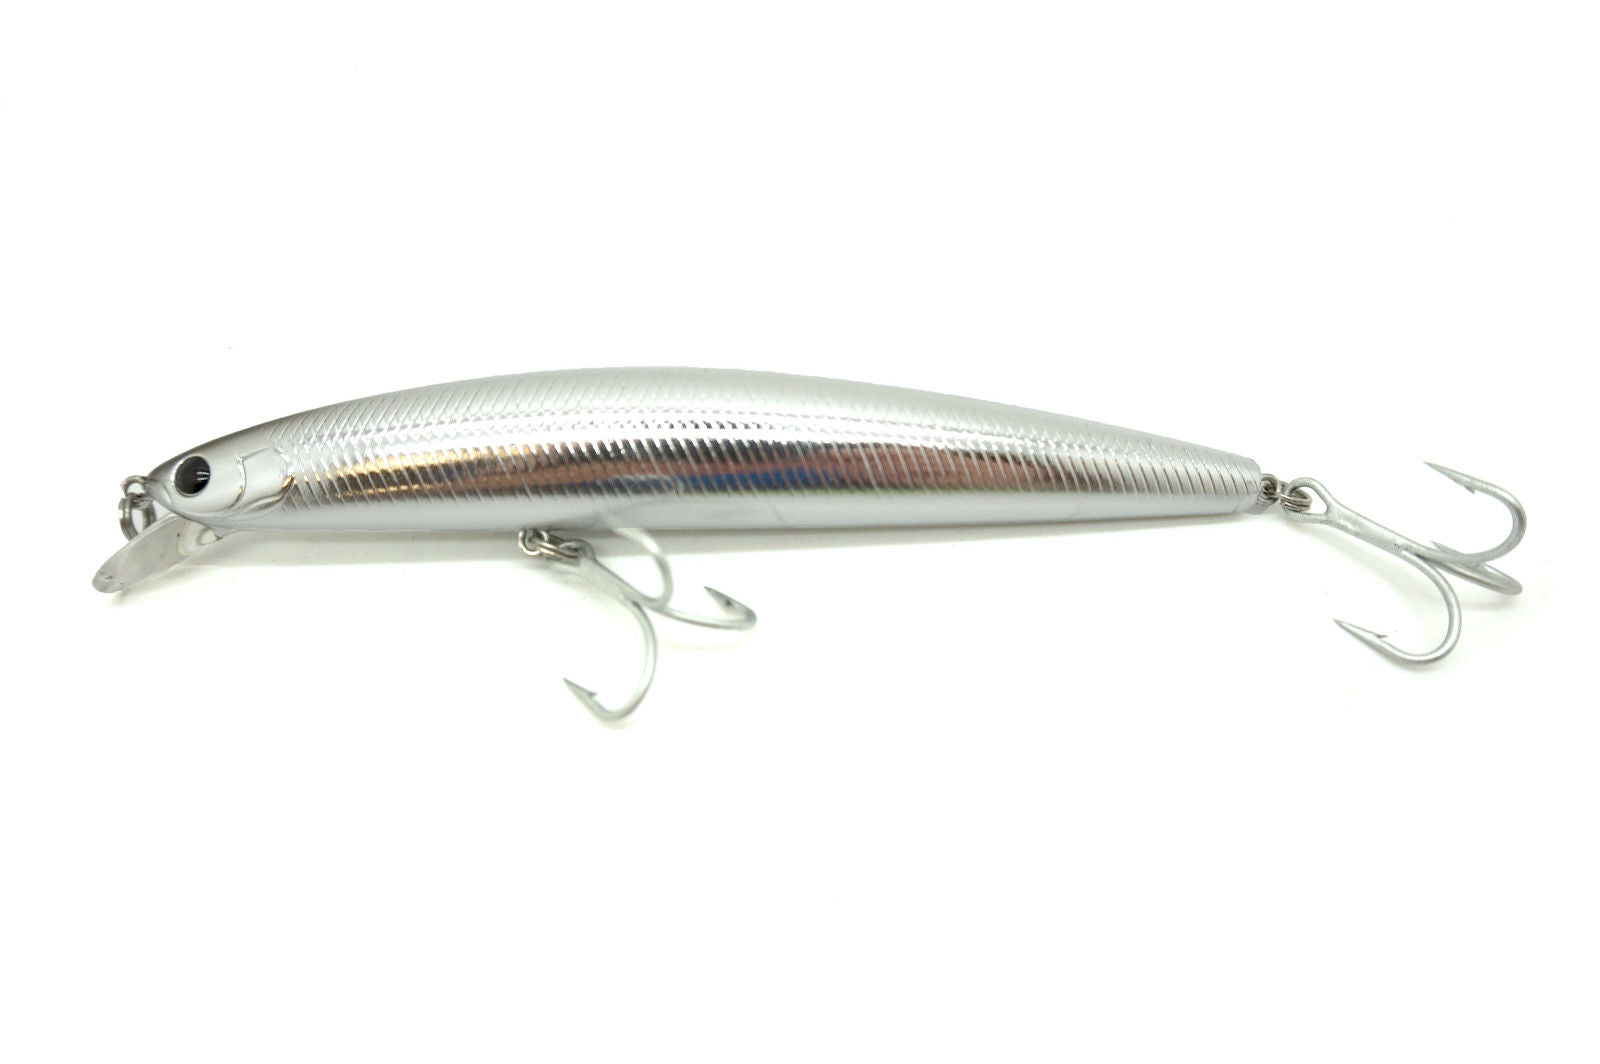 New Daiwa Certate coming very - Todber Manor Lure Division